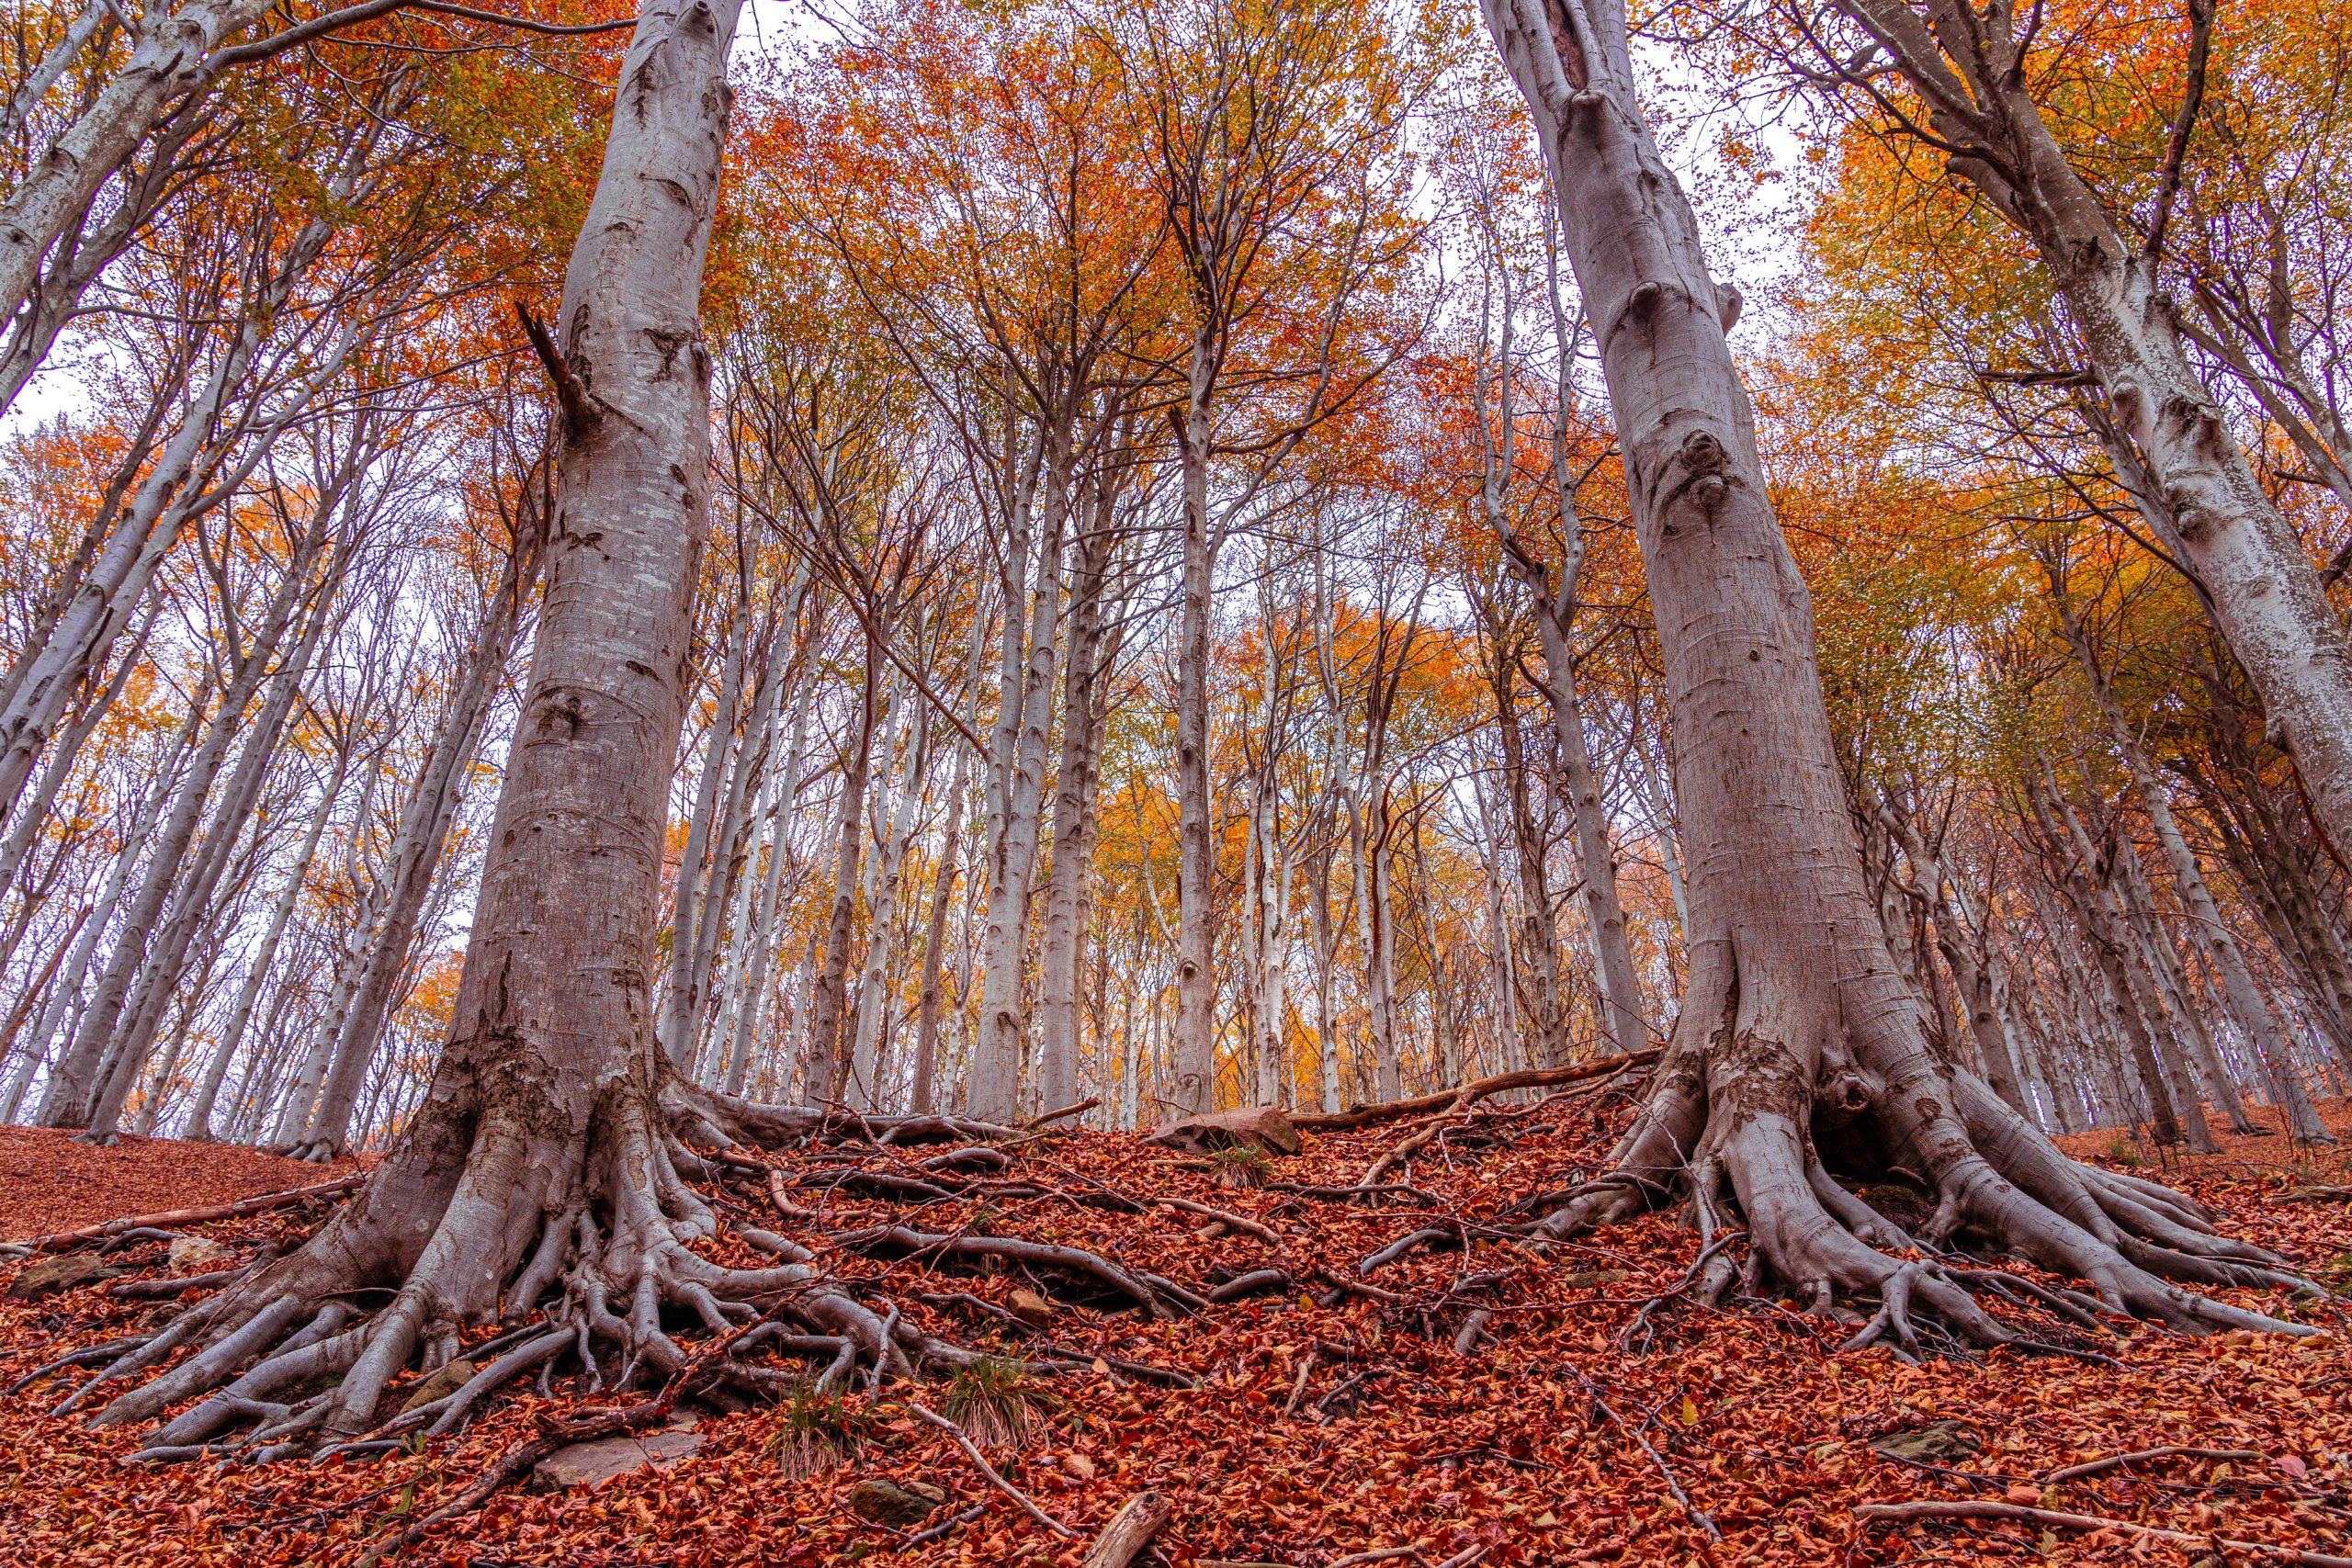 Red forest in autumn at Colle del Melogno, Italy.